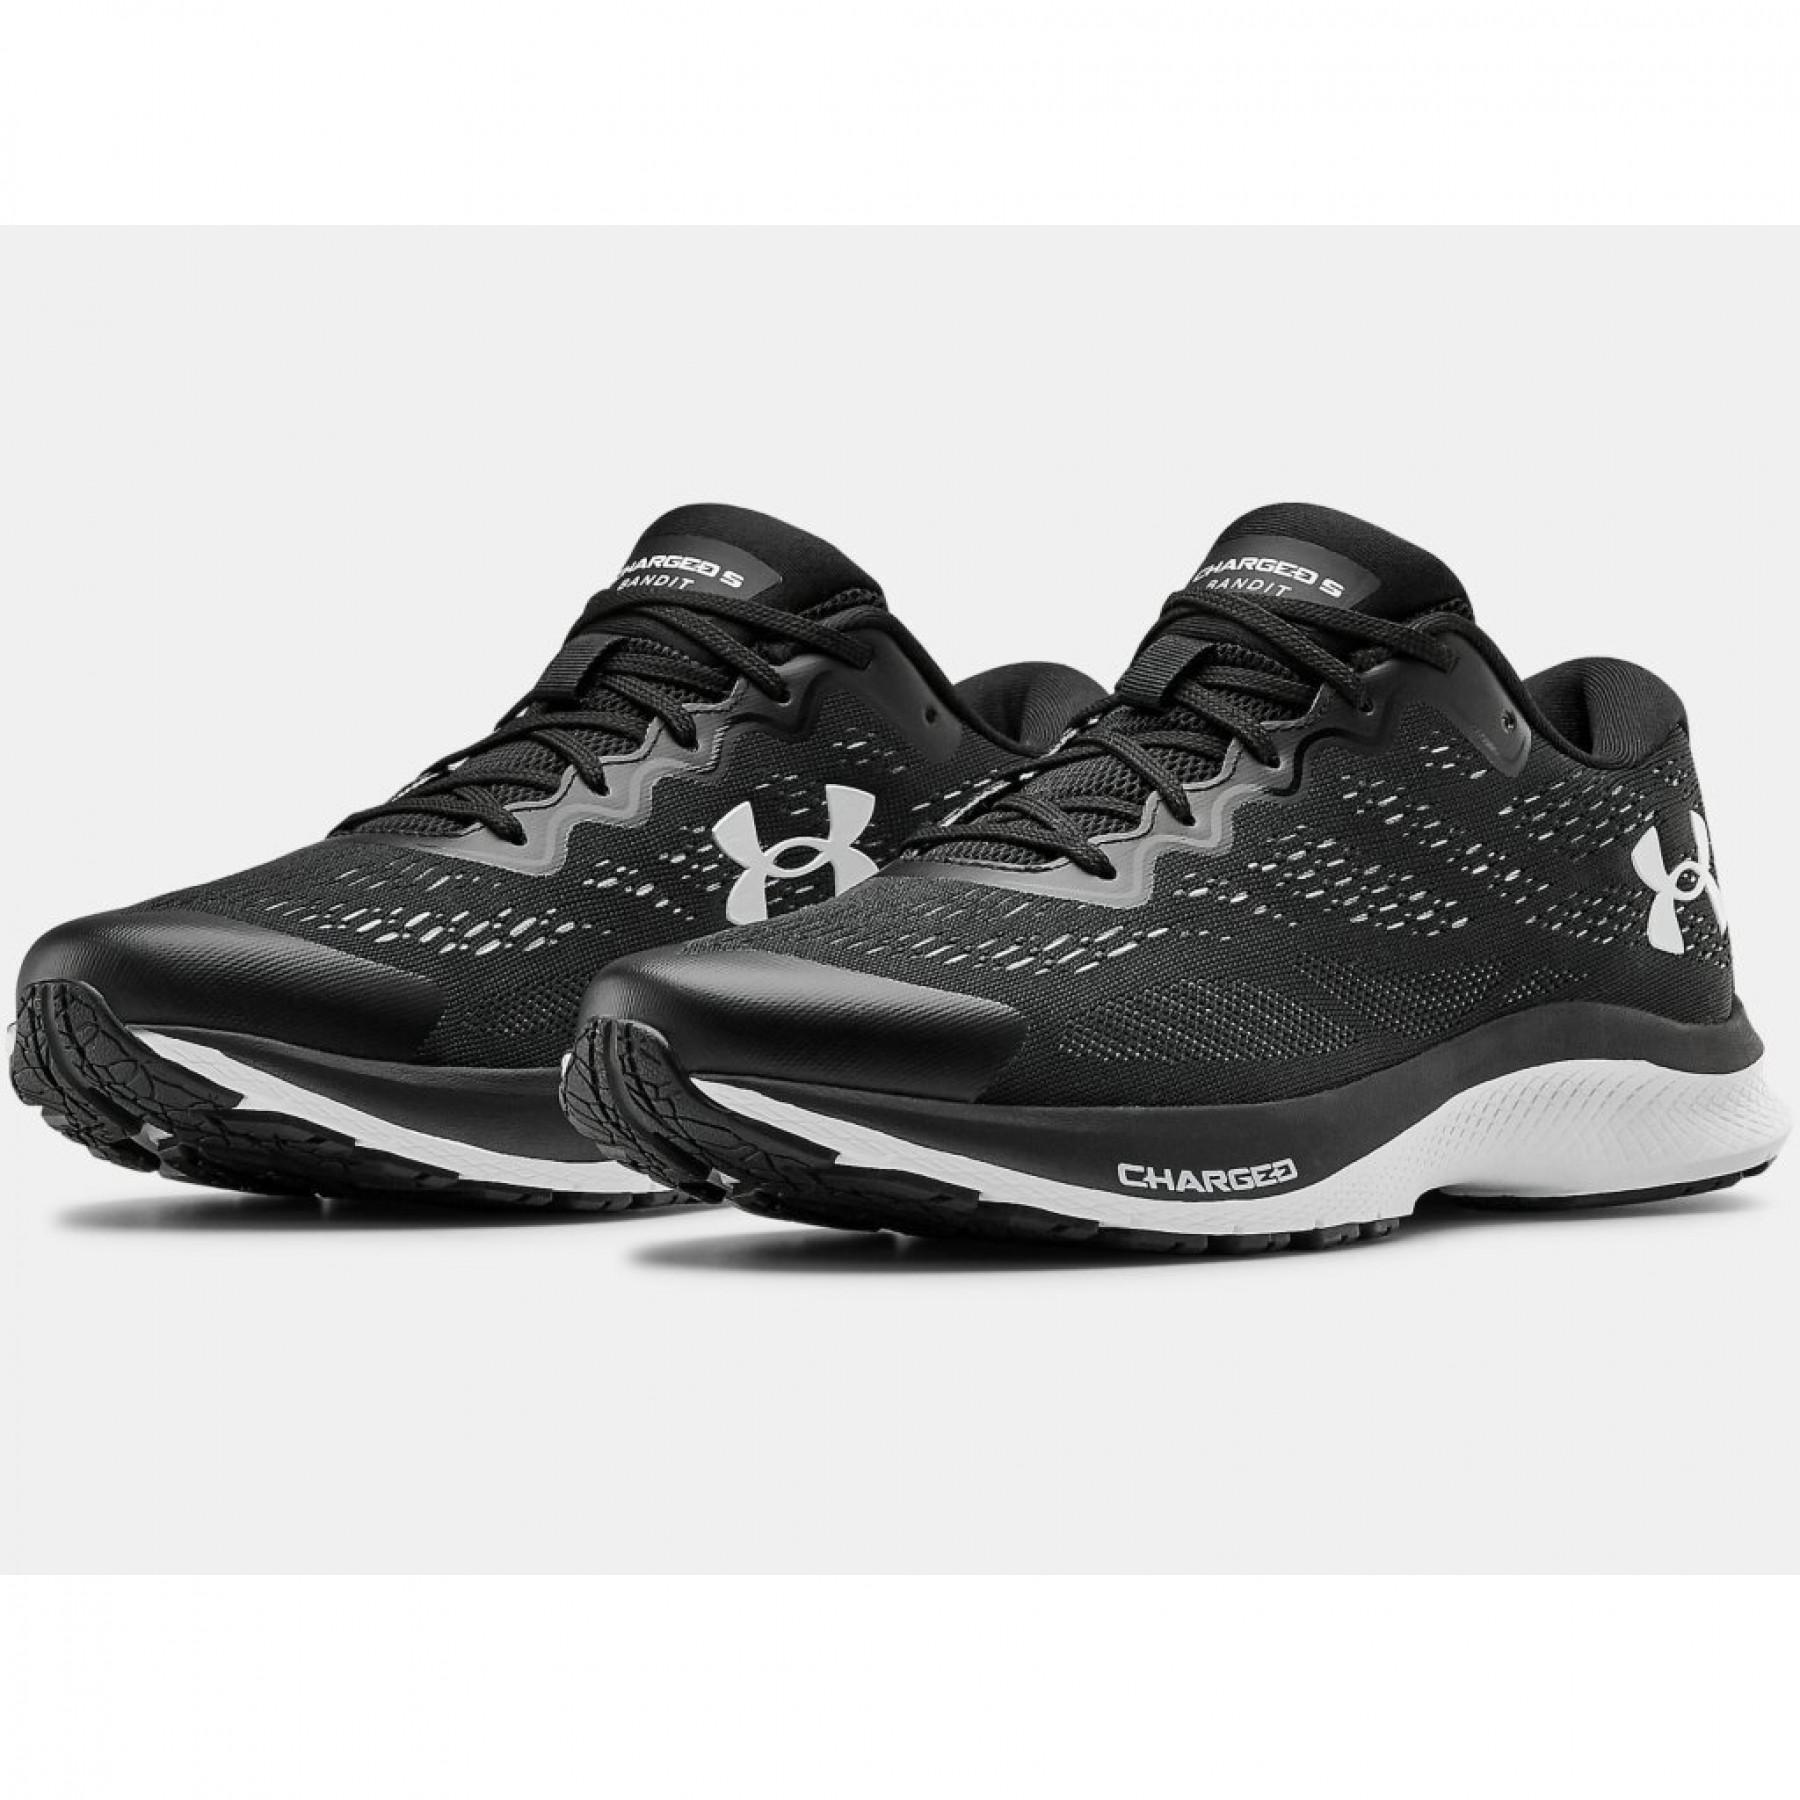 Zapatos de mujer Under Armour Charged Bandit 6